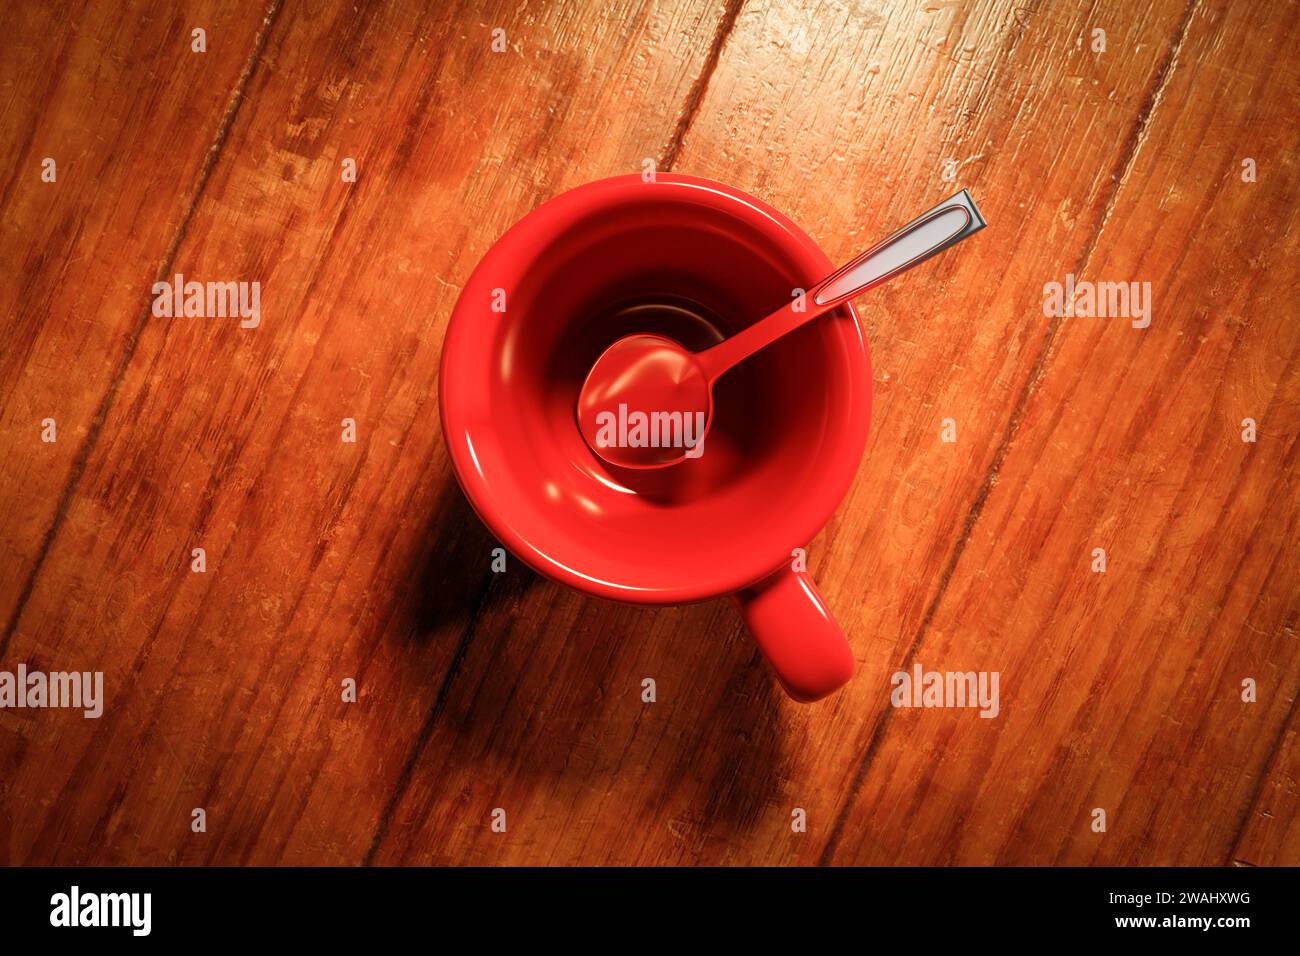 Red porcelain tea cup on a wooden kitchen table. Stock Photo